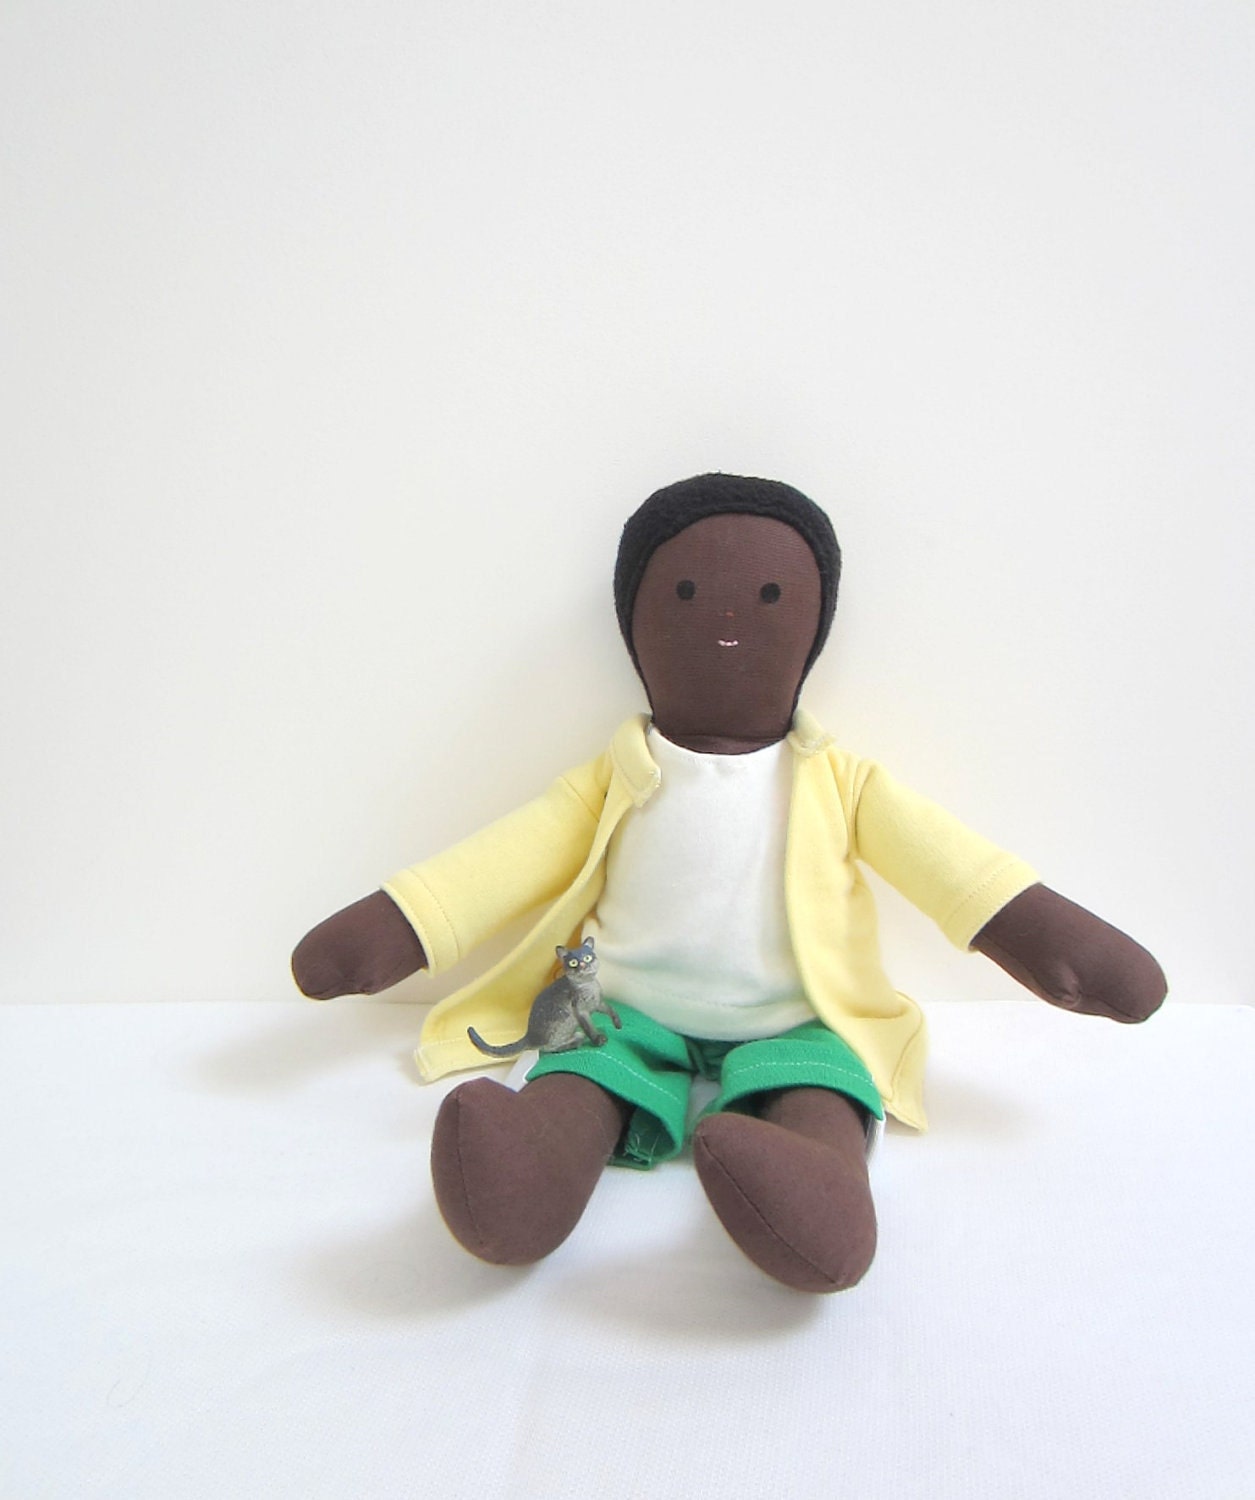 SALE Uri the eco friendly Boy doll handmade upcycled South American African American brown green yellowbubynoa Best Friend